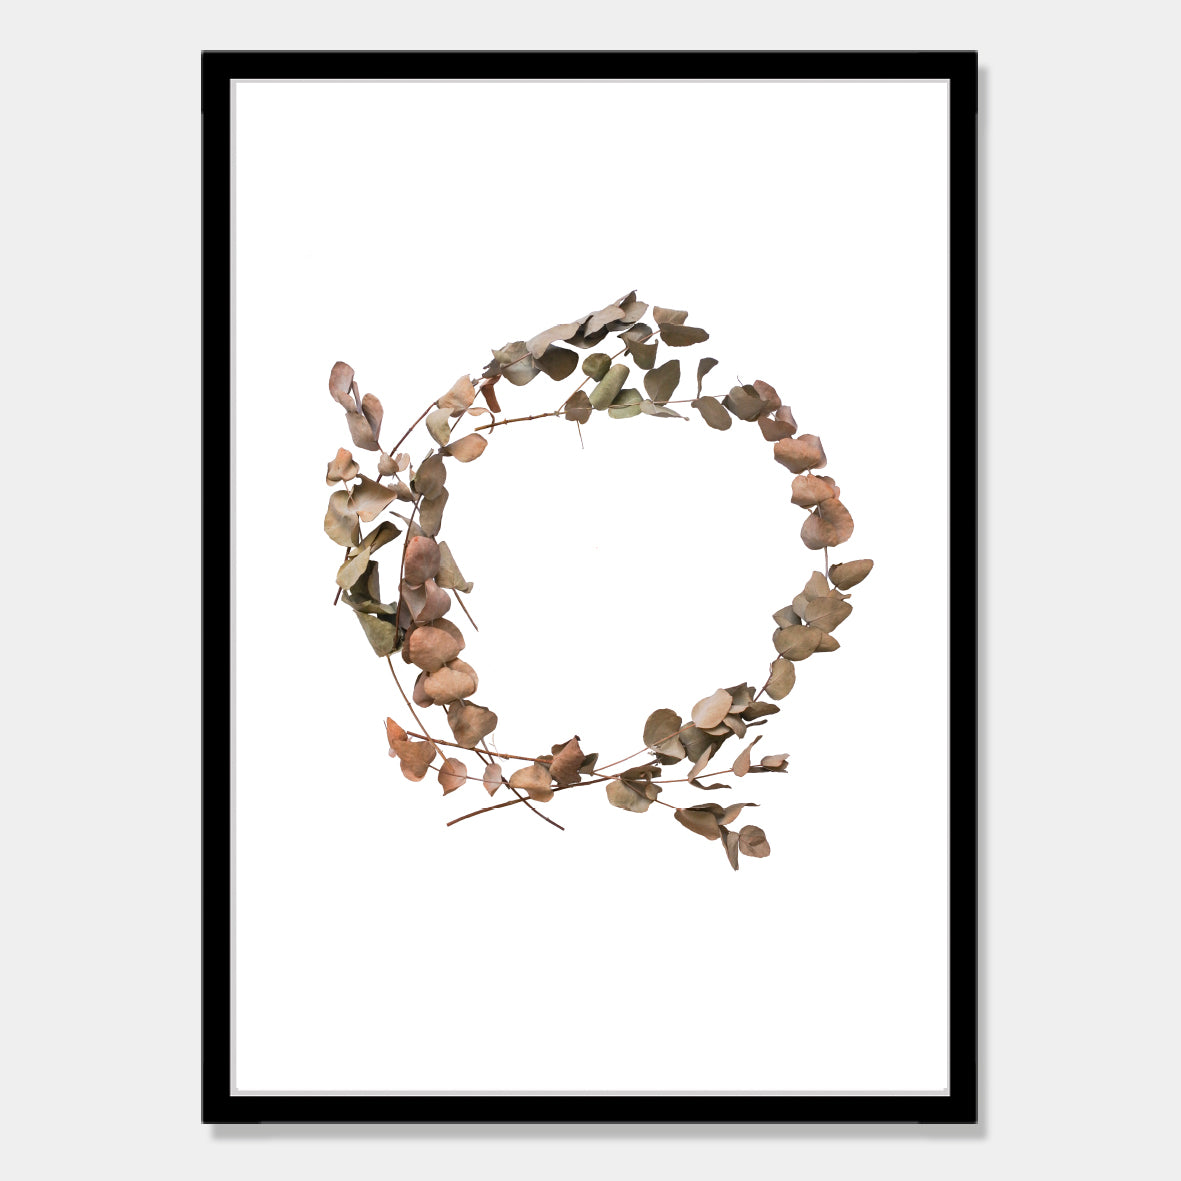 Photographic art print of dried leaves in a o shape by Bon Jung. Printed in New Zealand by endemicworld and framed in Black.